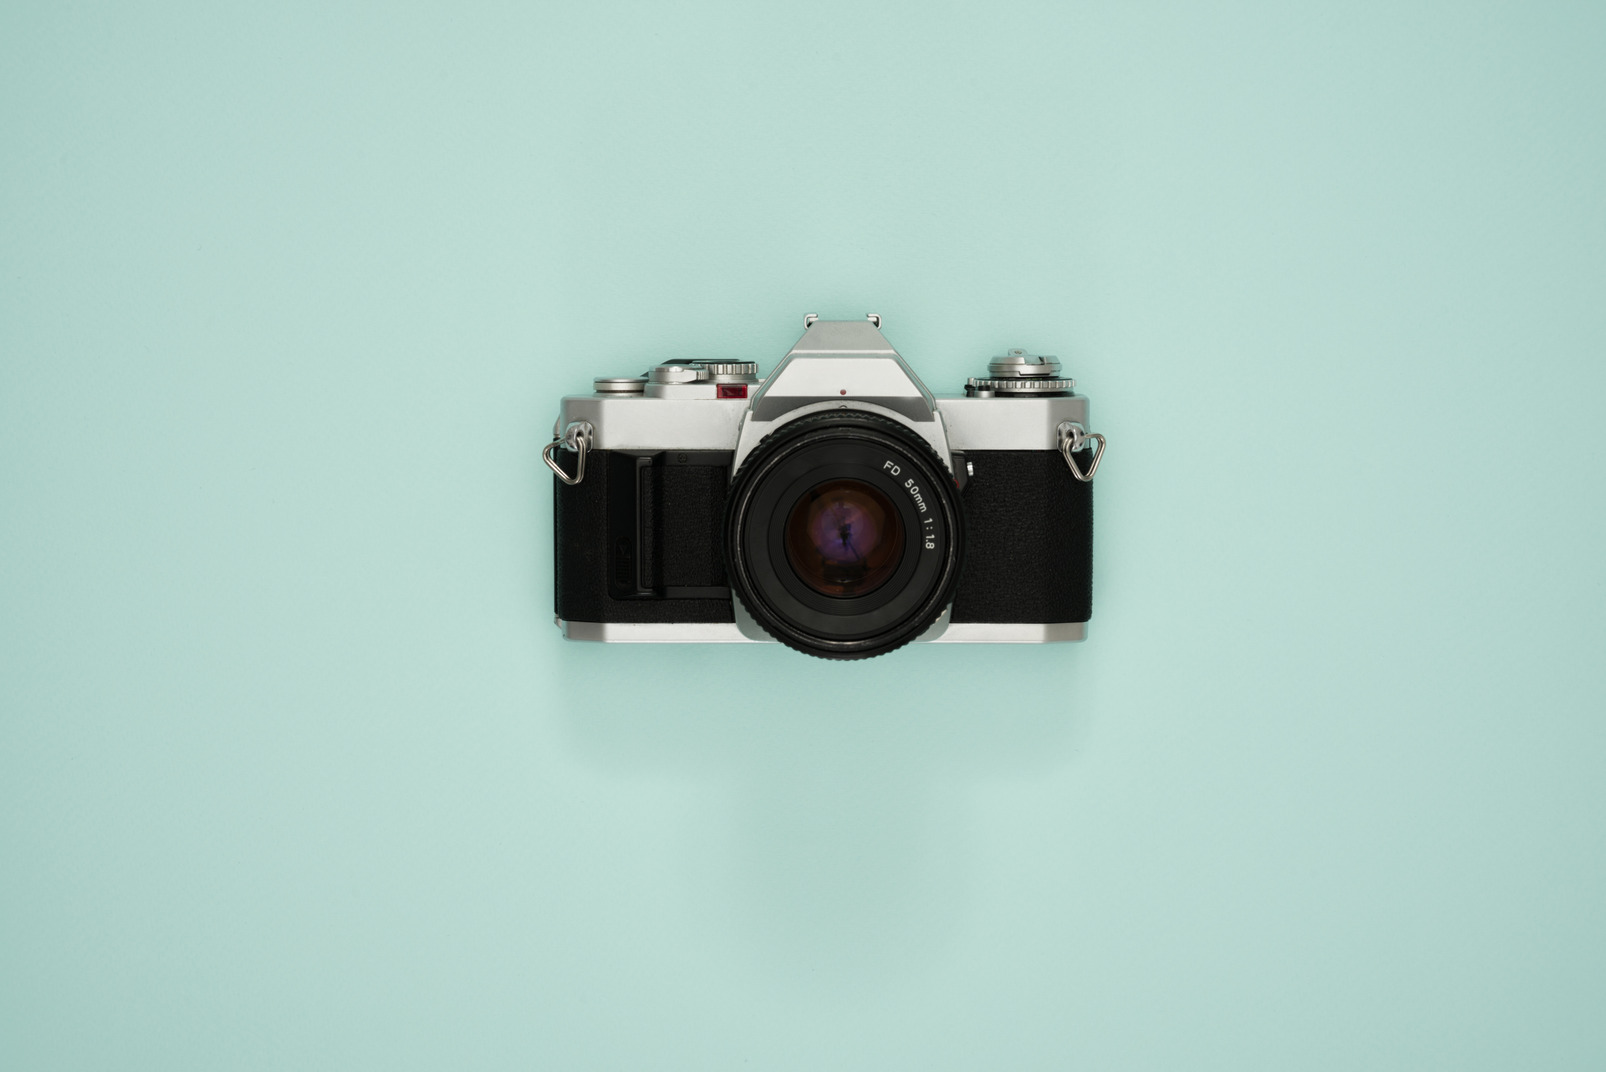 Vintage photo camera on a turquoise background